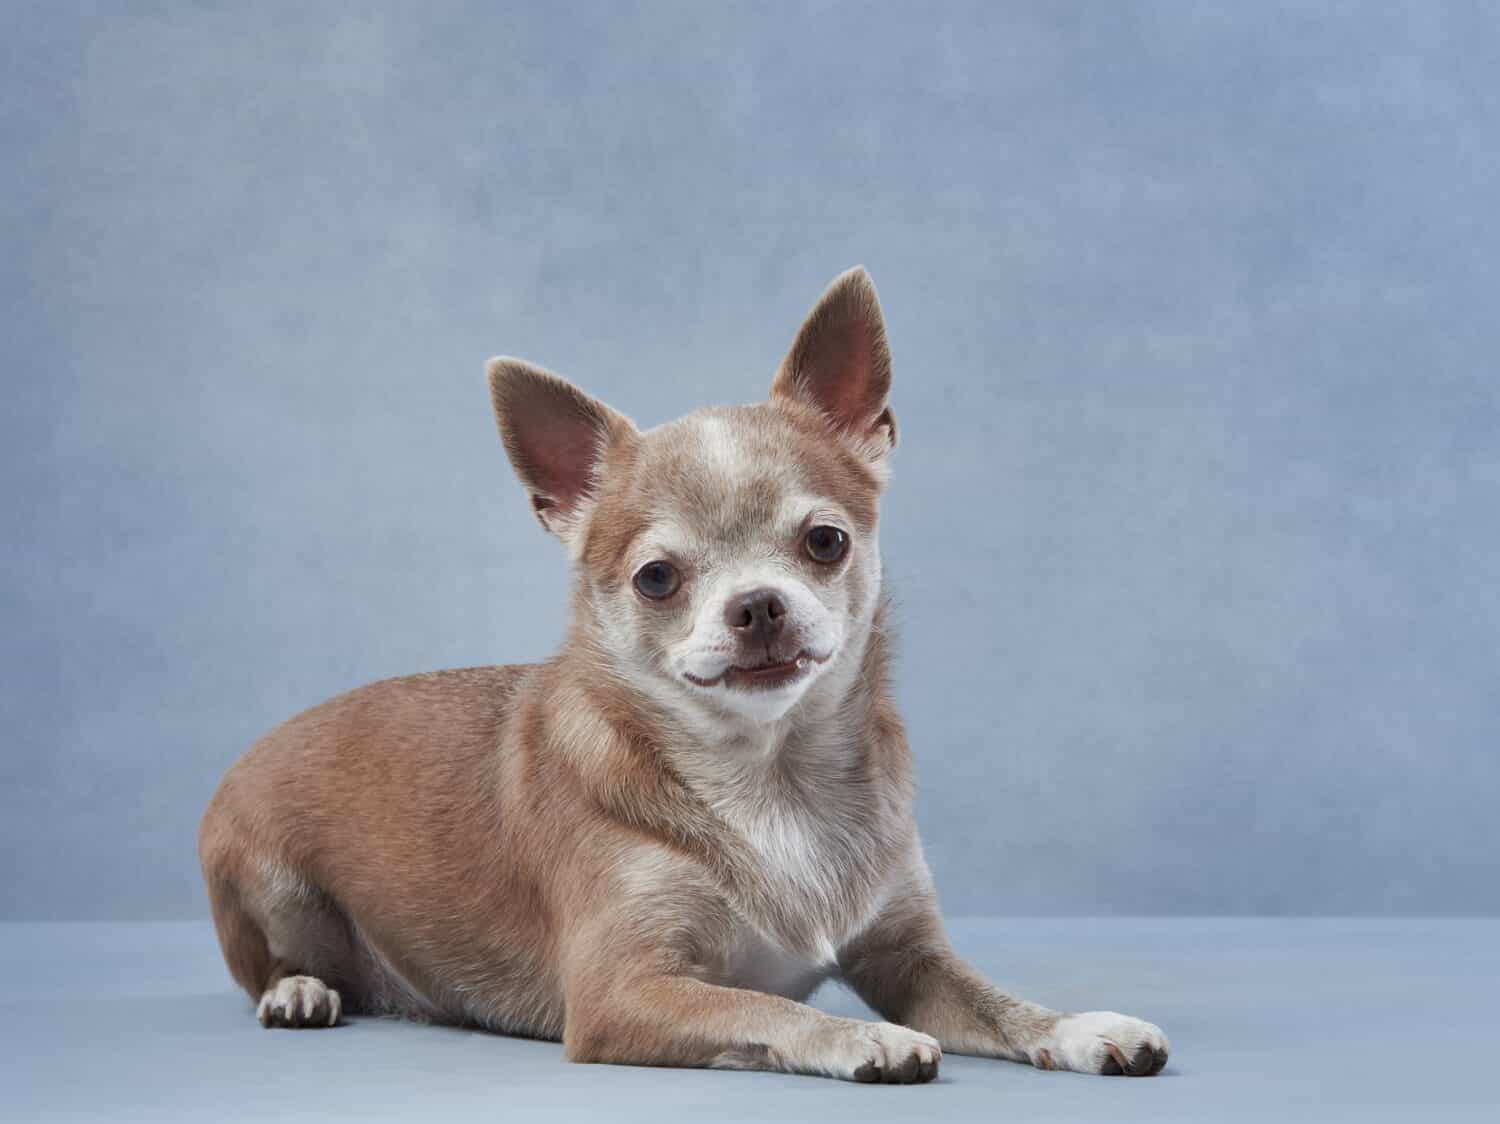 chihuahua on a blue background. Portrait of a beautiful little dog in the studio. Funny pet